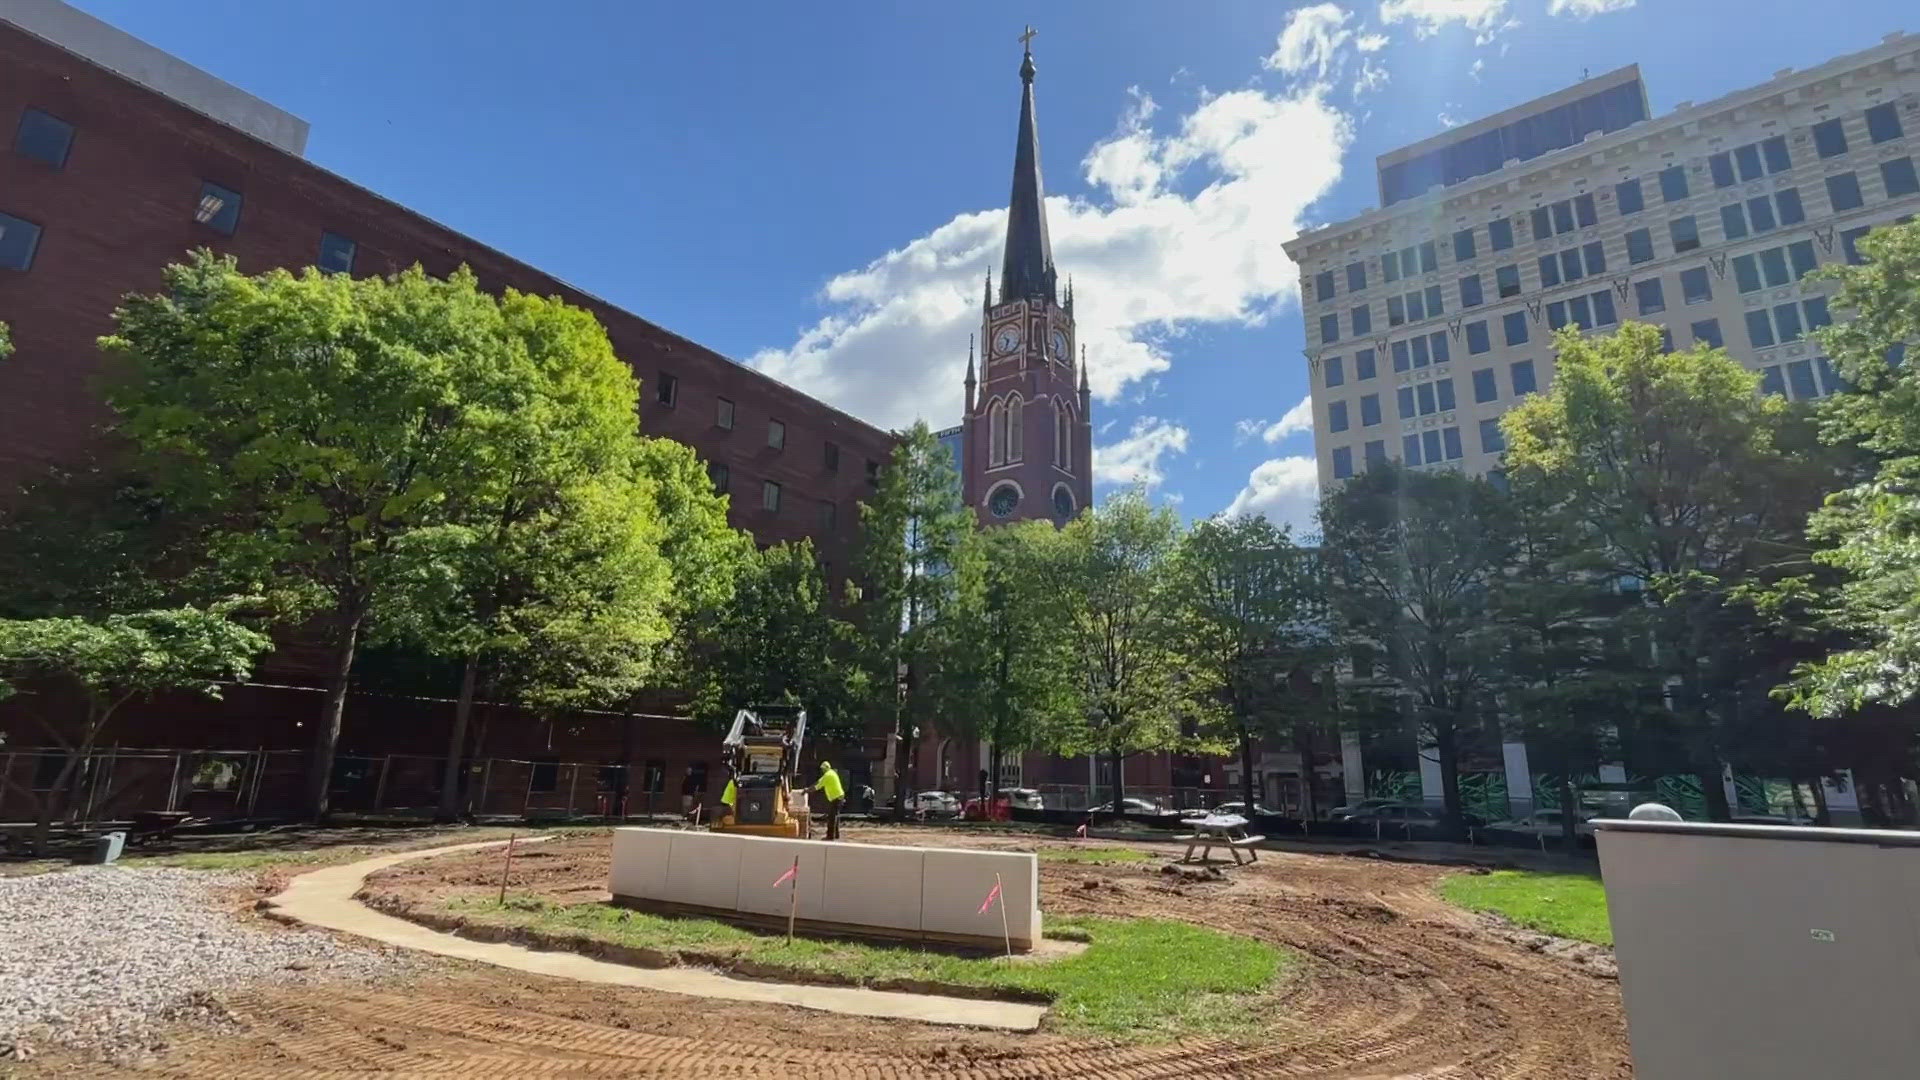 UofL researchers have begun construction on converting Founders Square in downtown Louisville into a microforest.